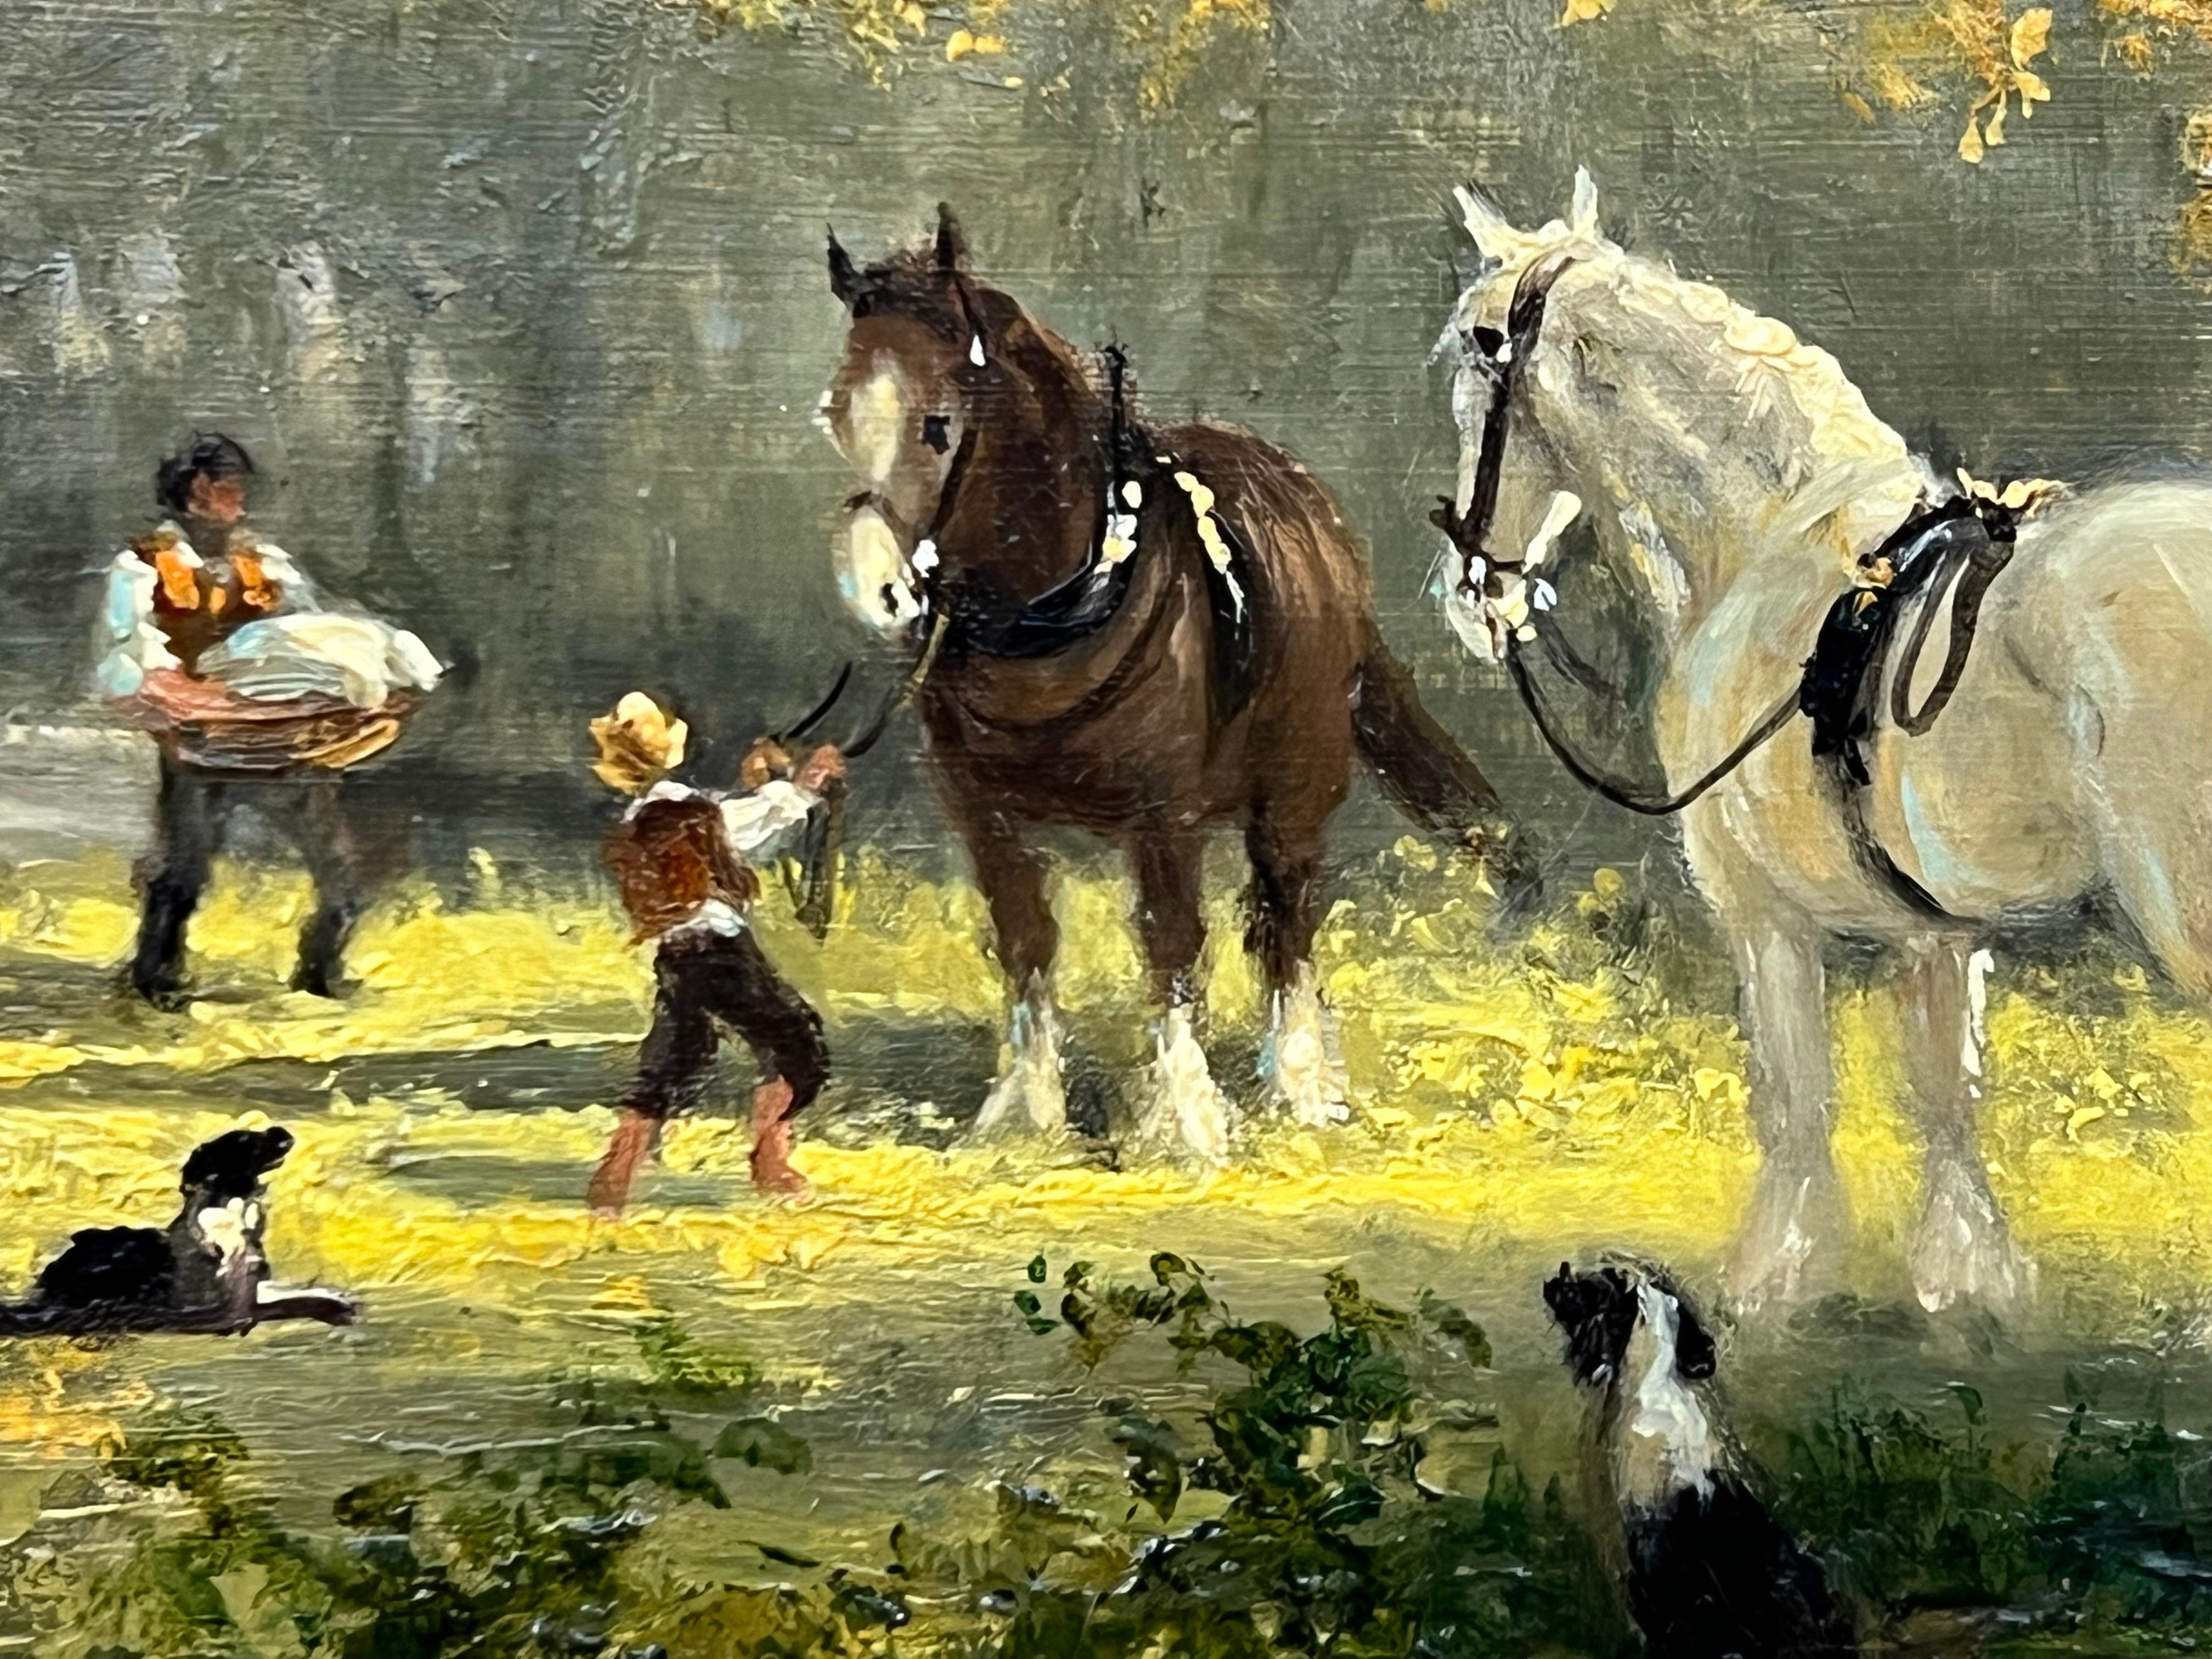 Idyllic Countryside Scene with River Boat, Horses, Figures & Dogs in Sunshine by German-born British Artist, Gudrun Sibbons (1925- ). Original oil painting of a River Landscape with various figures  (men, women & children) unloading a boat, with